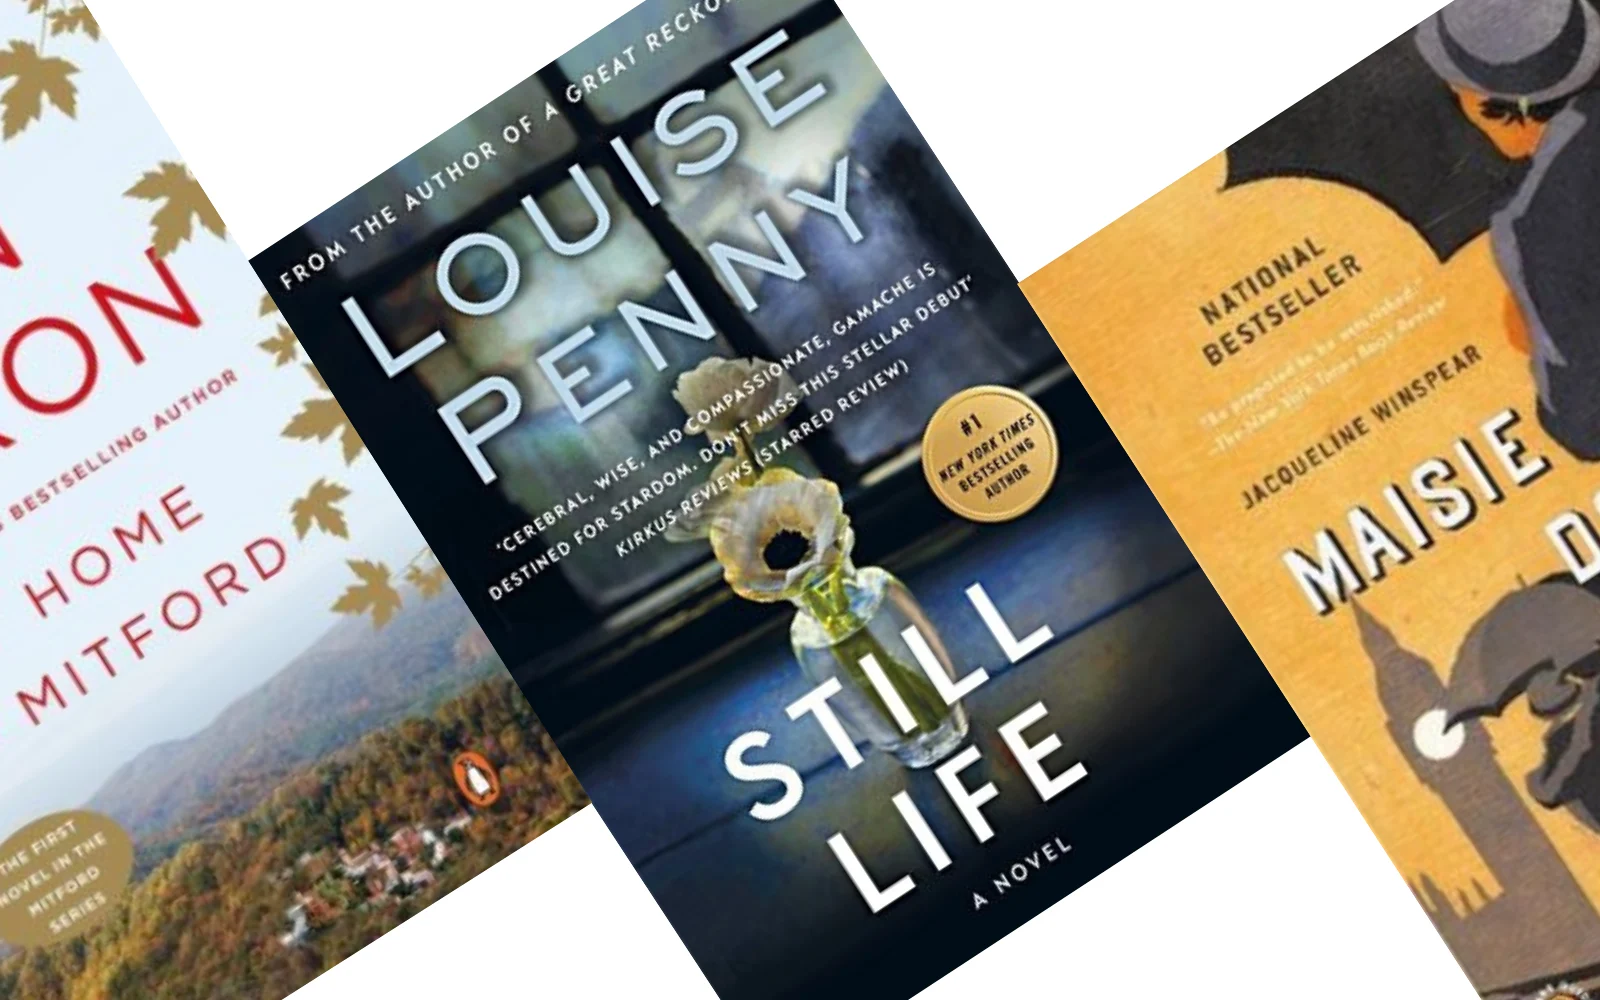 Louise Penny Wrote a No. 1 Best Seller During Her Year Off - The New York  Times